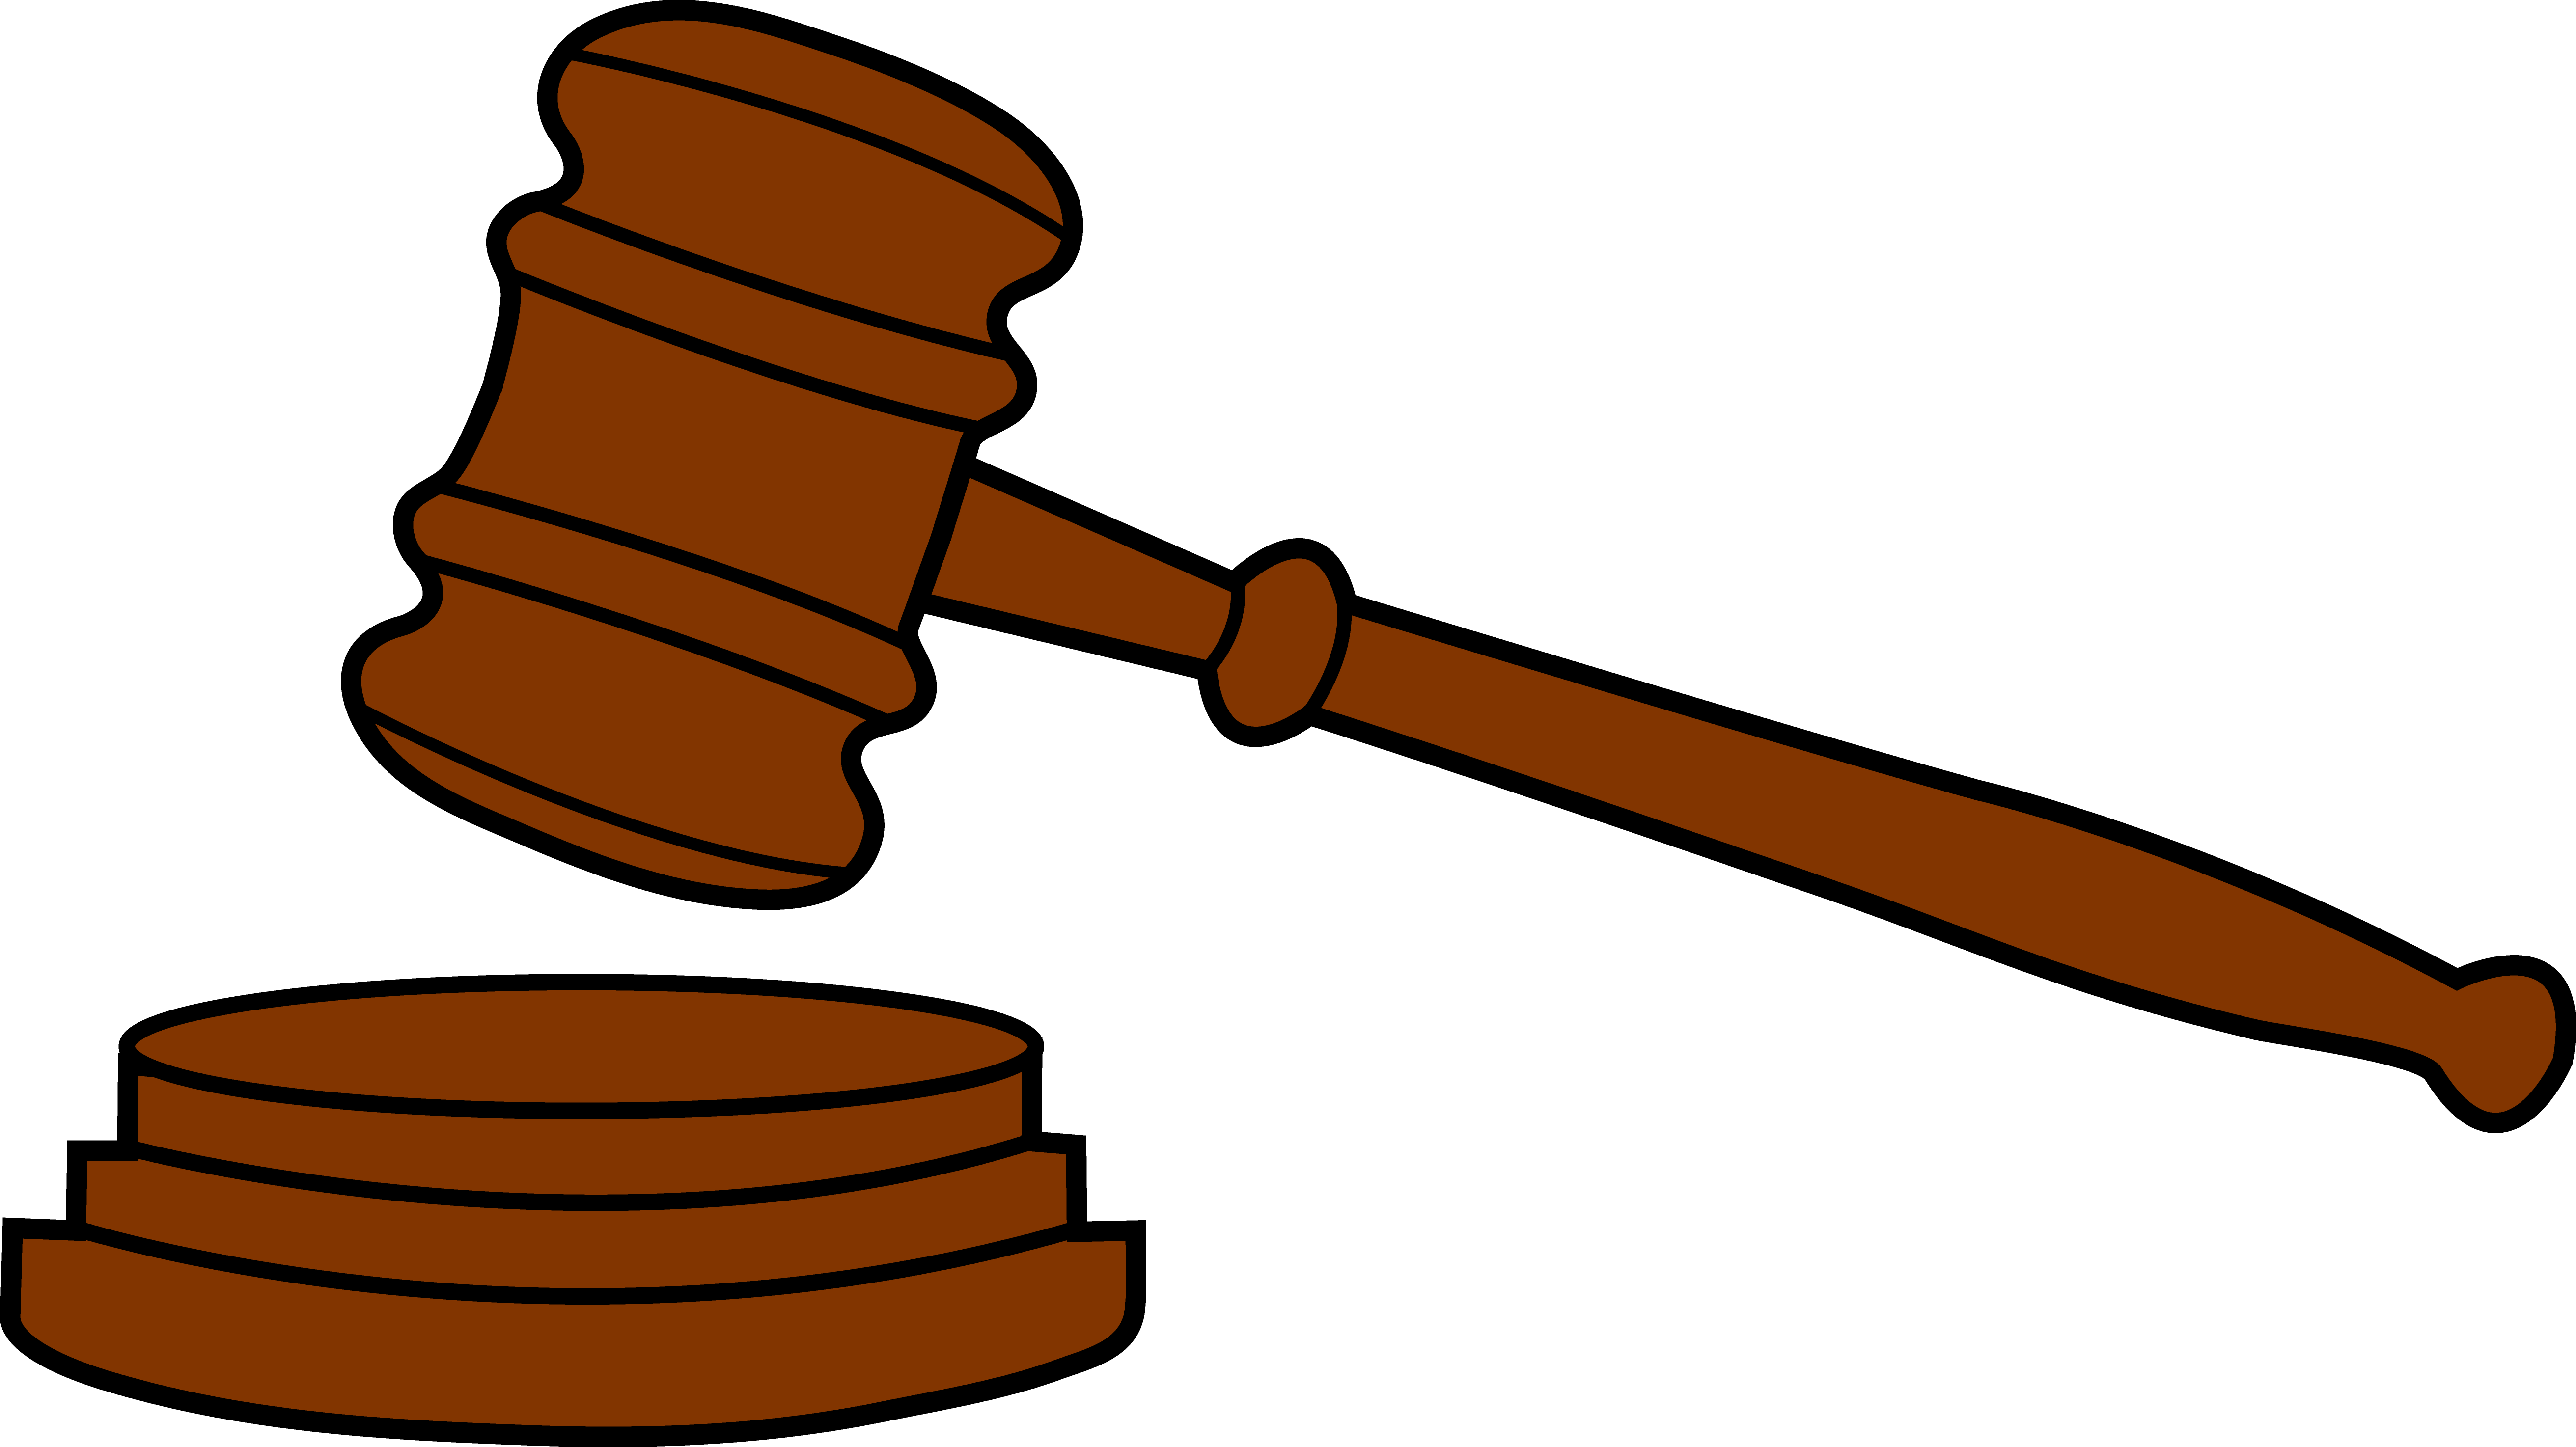  collection of law. Gavel clipart judicial branch